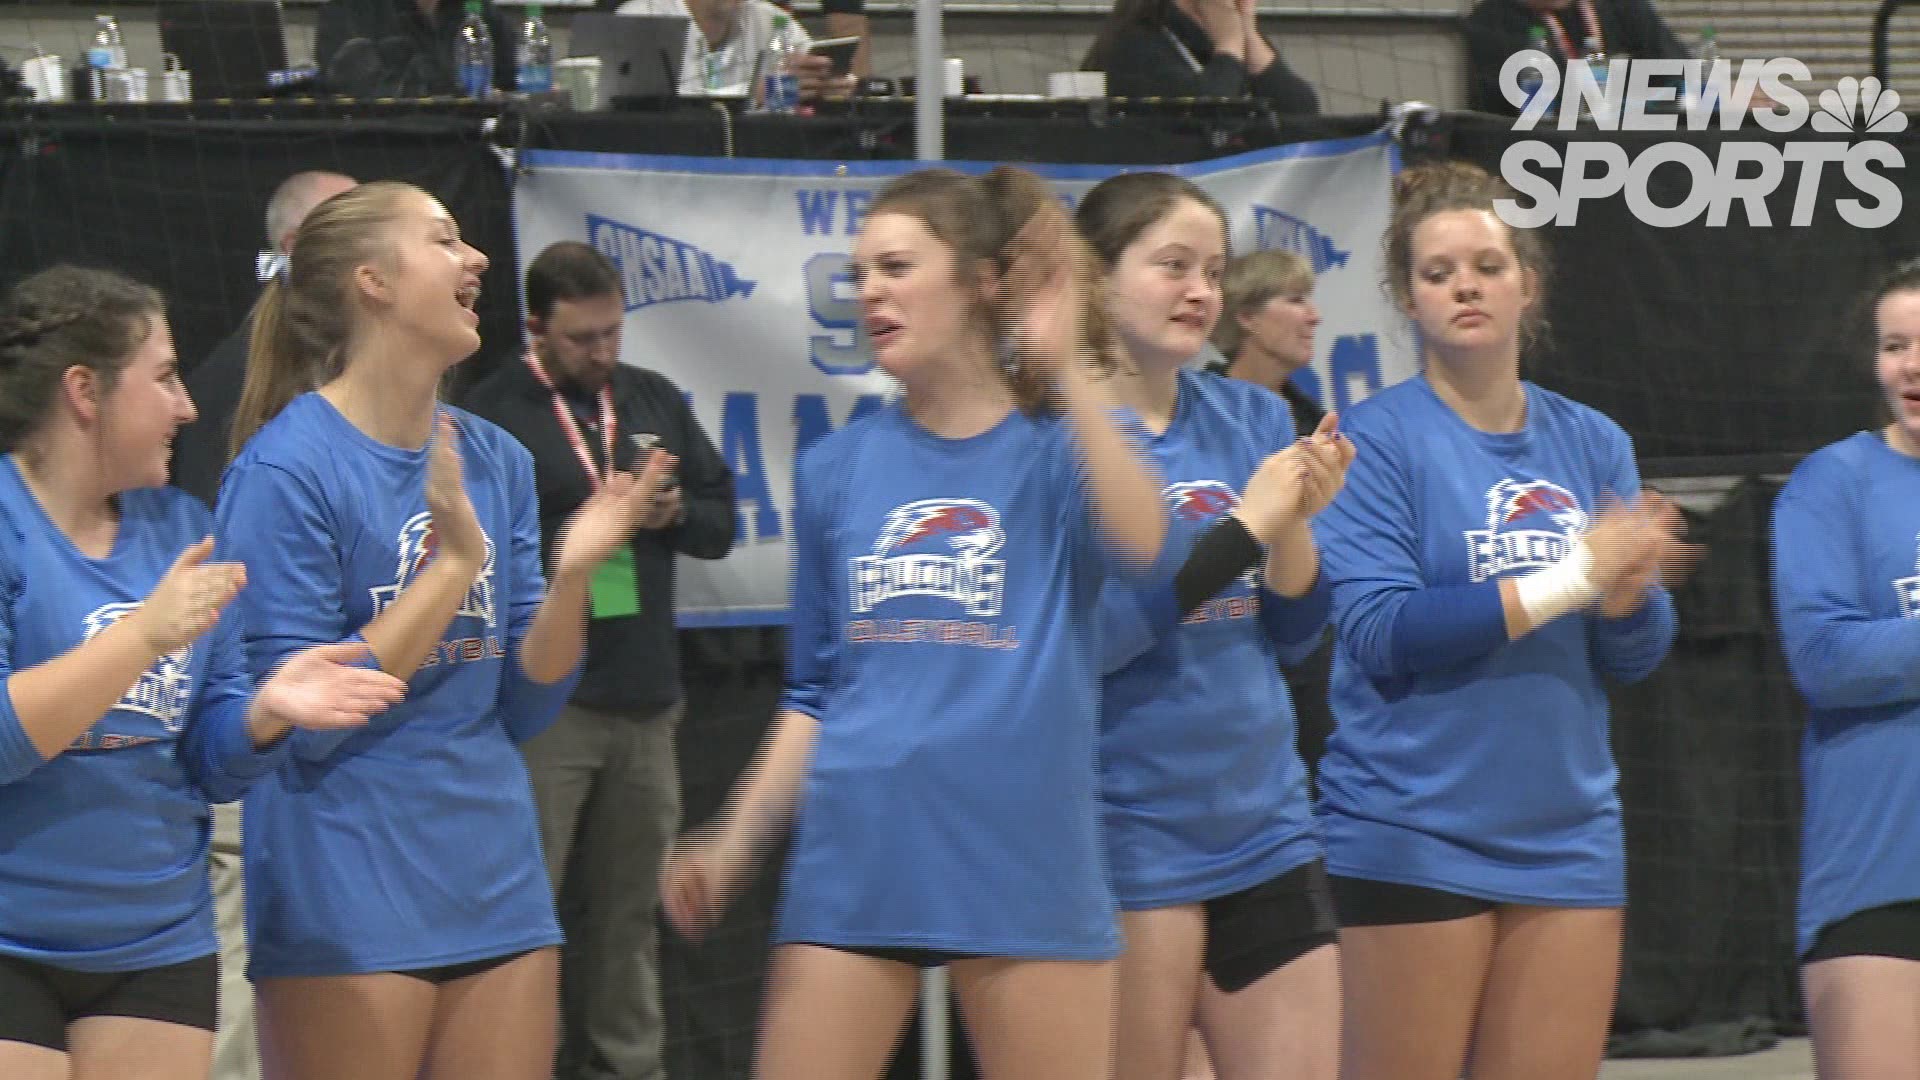 The No. 4 Wildcats swept the No. 6 Falcons in three sets to take the title.